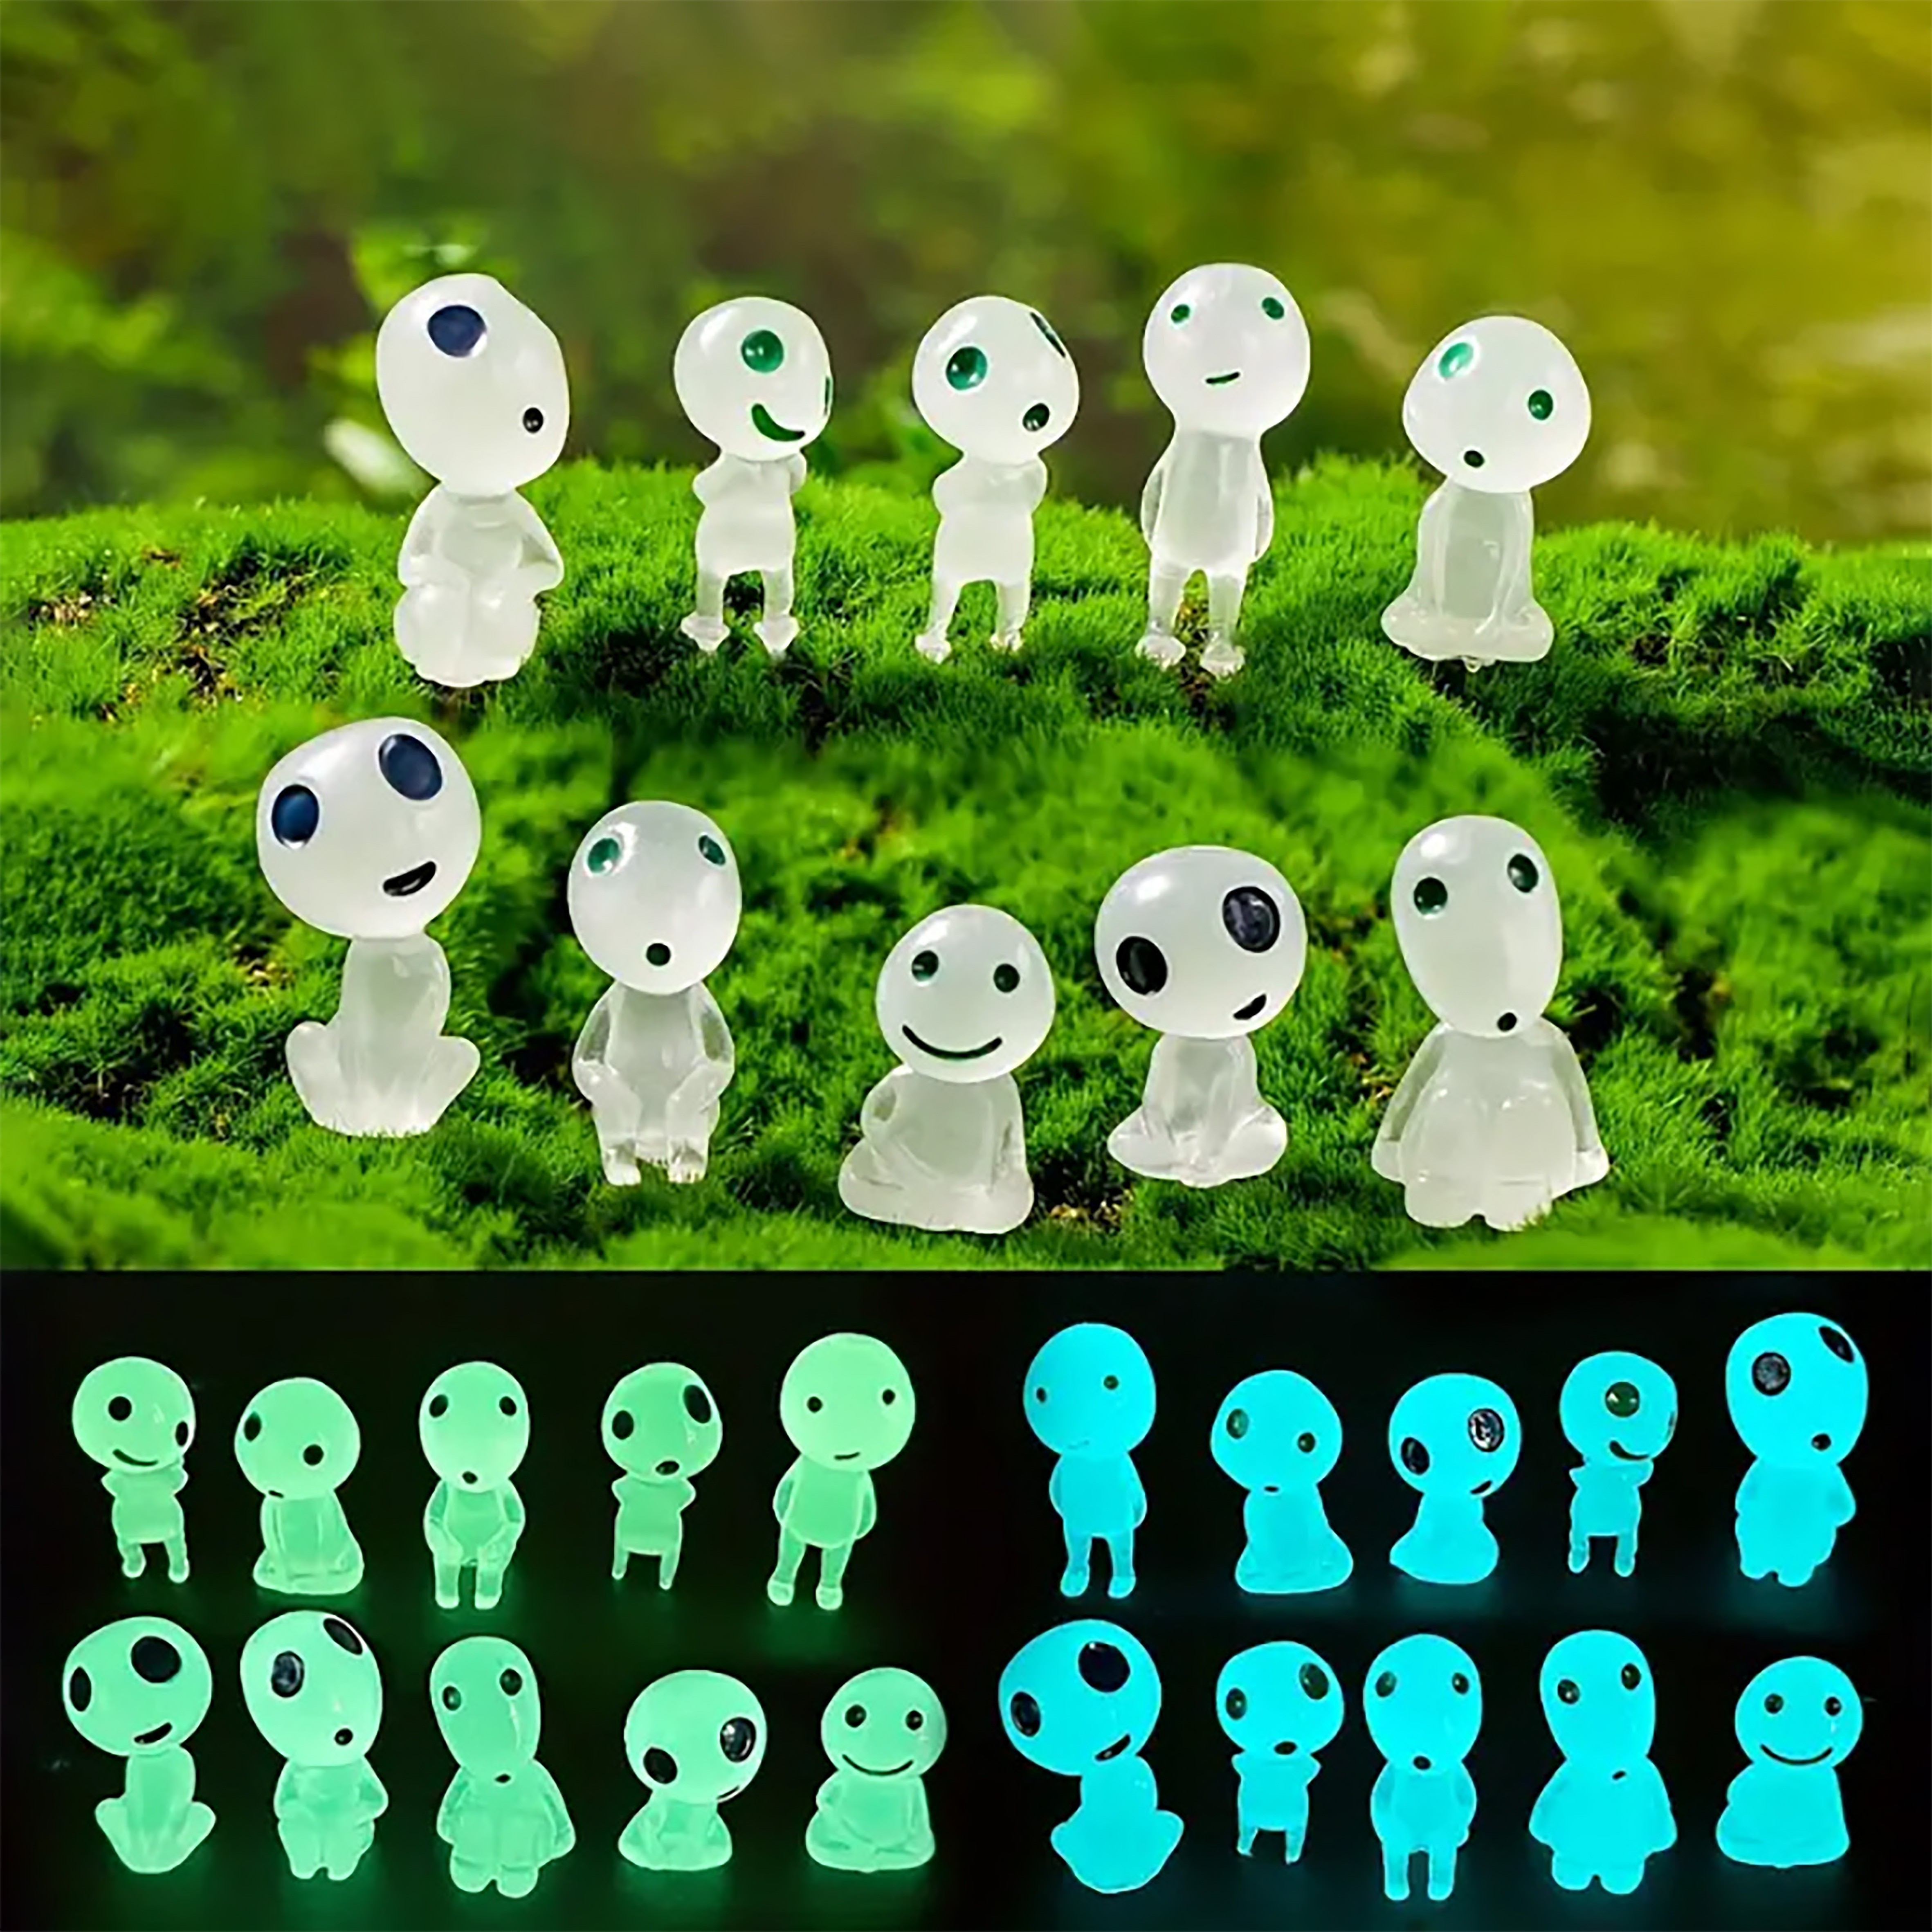 

10pcs Glow-in-the-dark Resin Mini Bulk Alien Decorations, Holiday Party Supplies, Pitana, Goody Bags, Easter And Halloween Egg Stuffing, Dark Glow